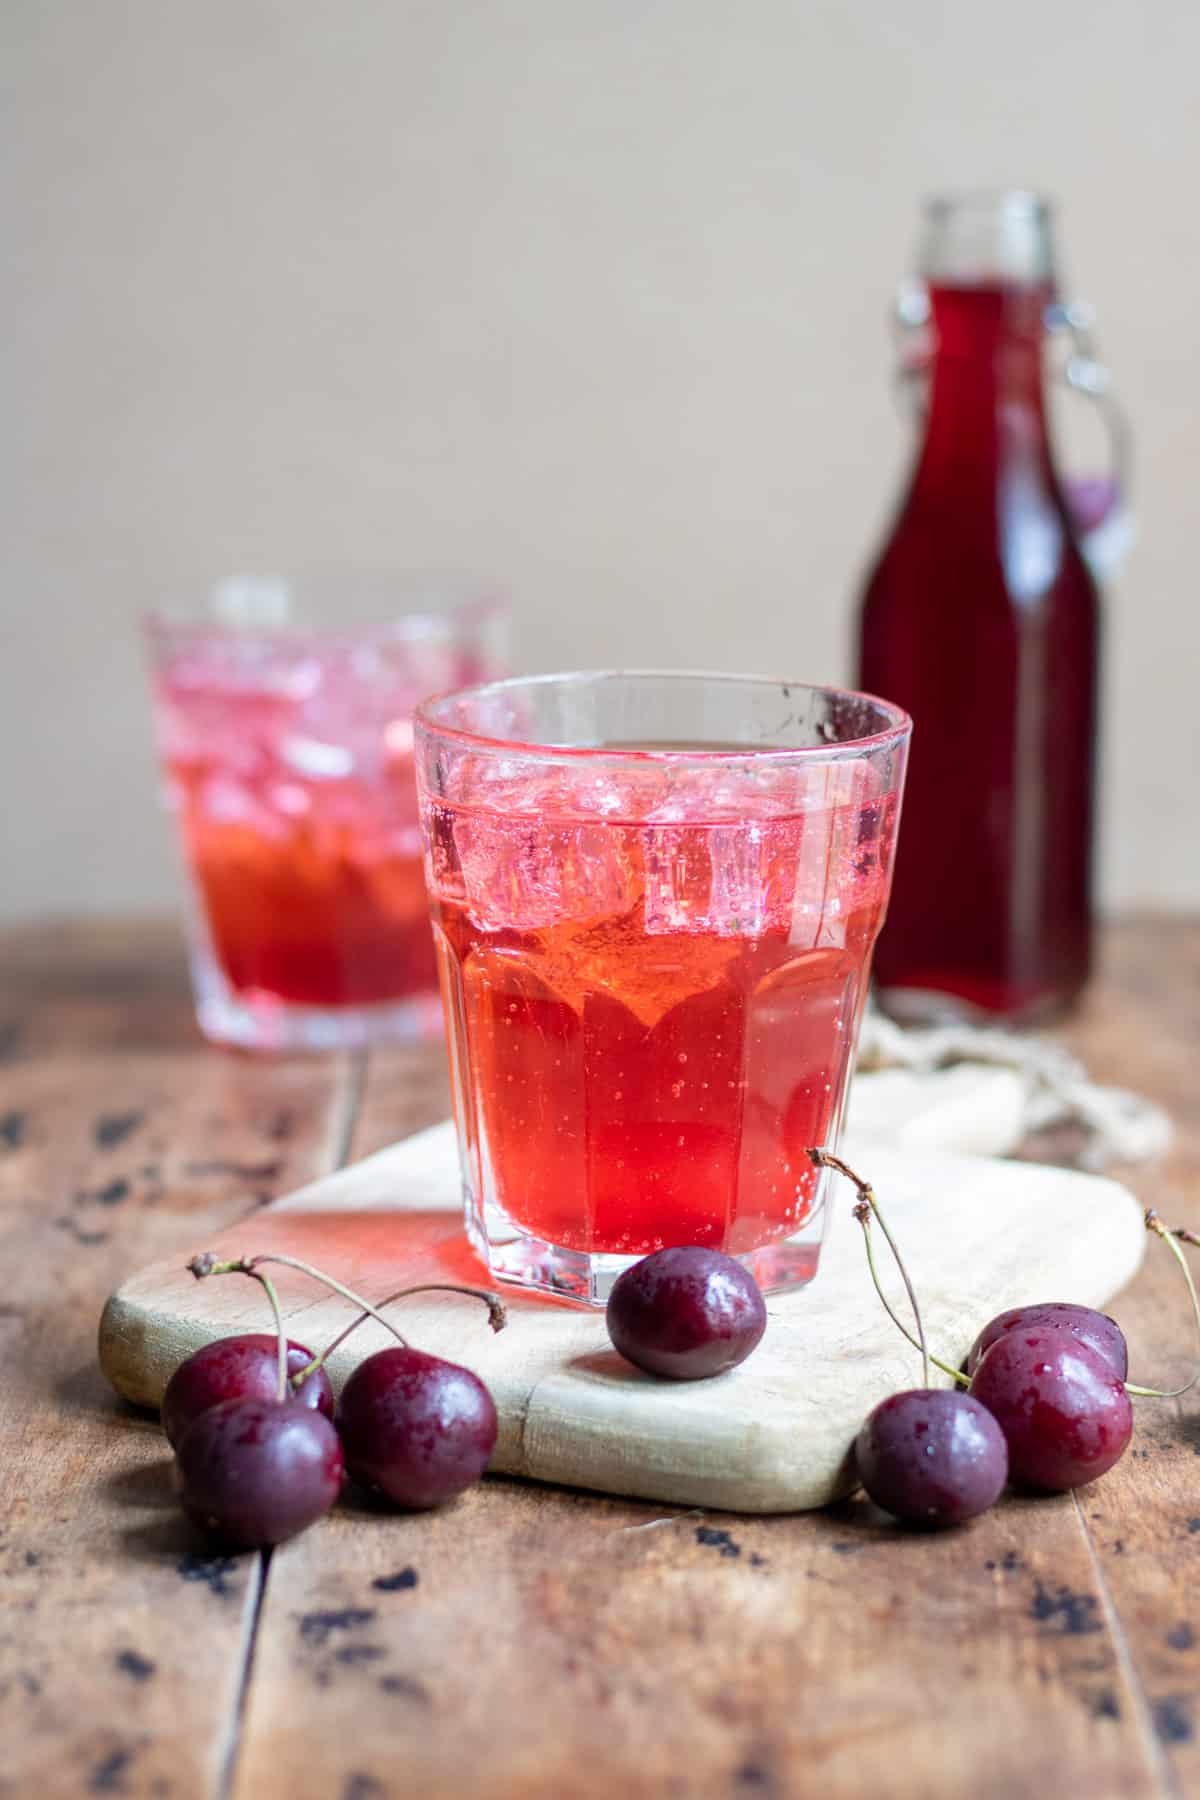 Glasses of soda water with cherry syrup.